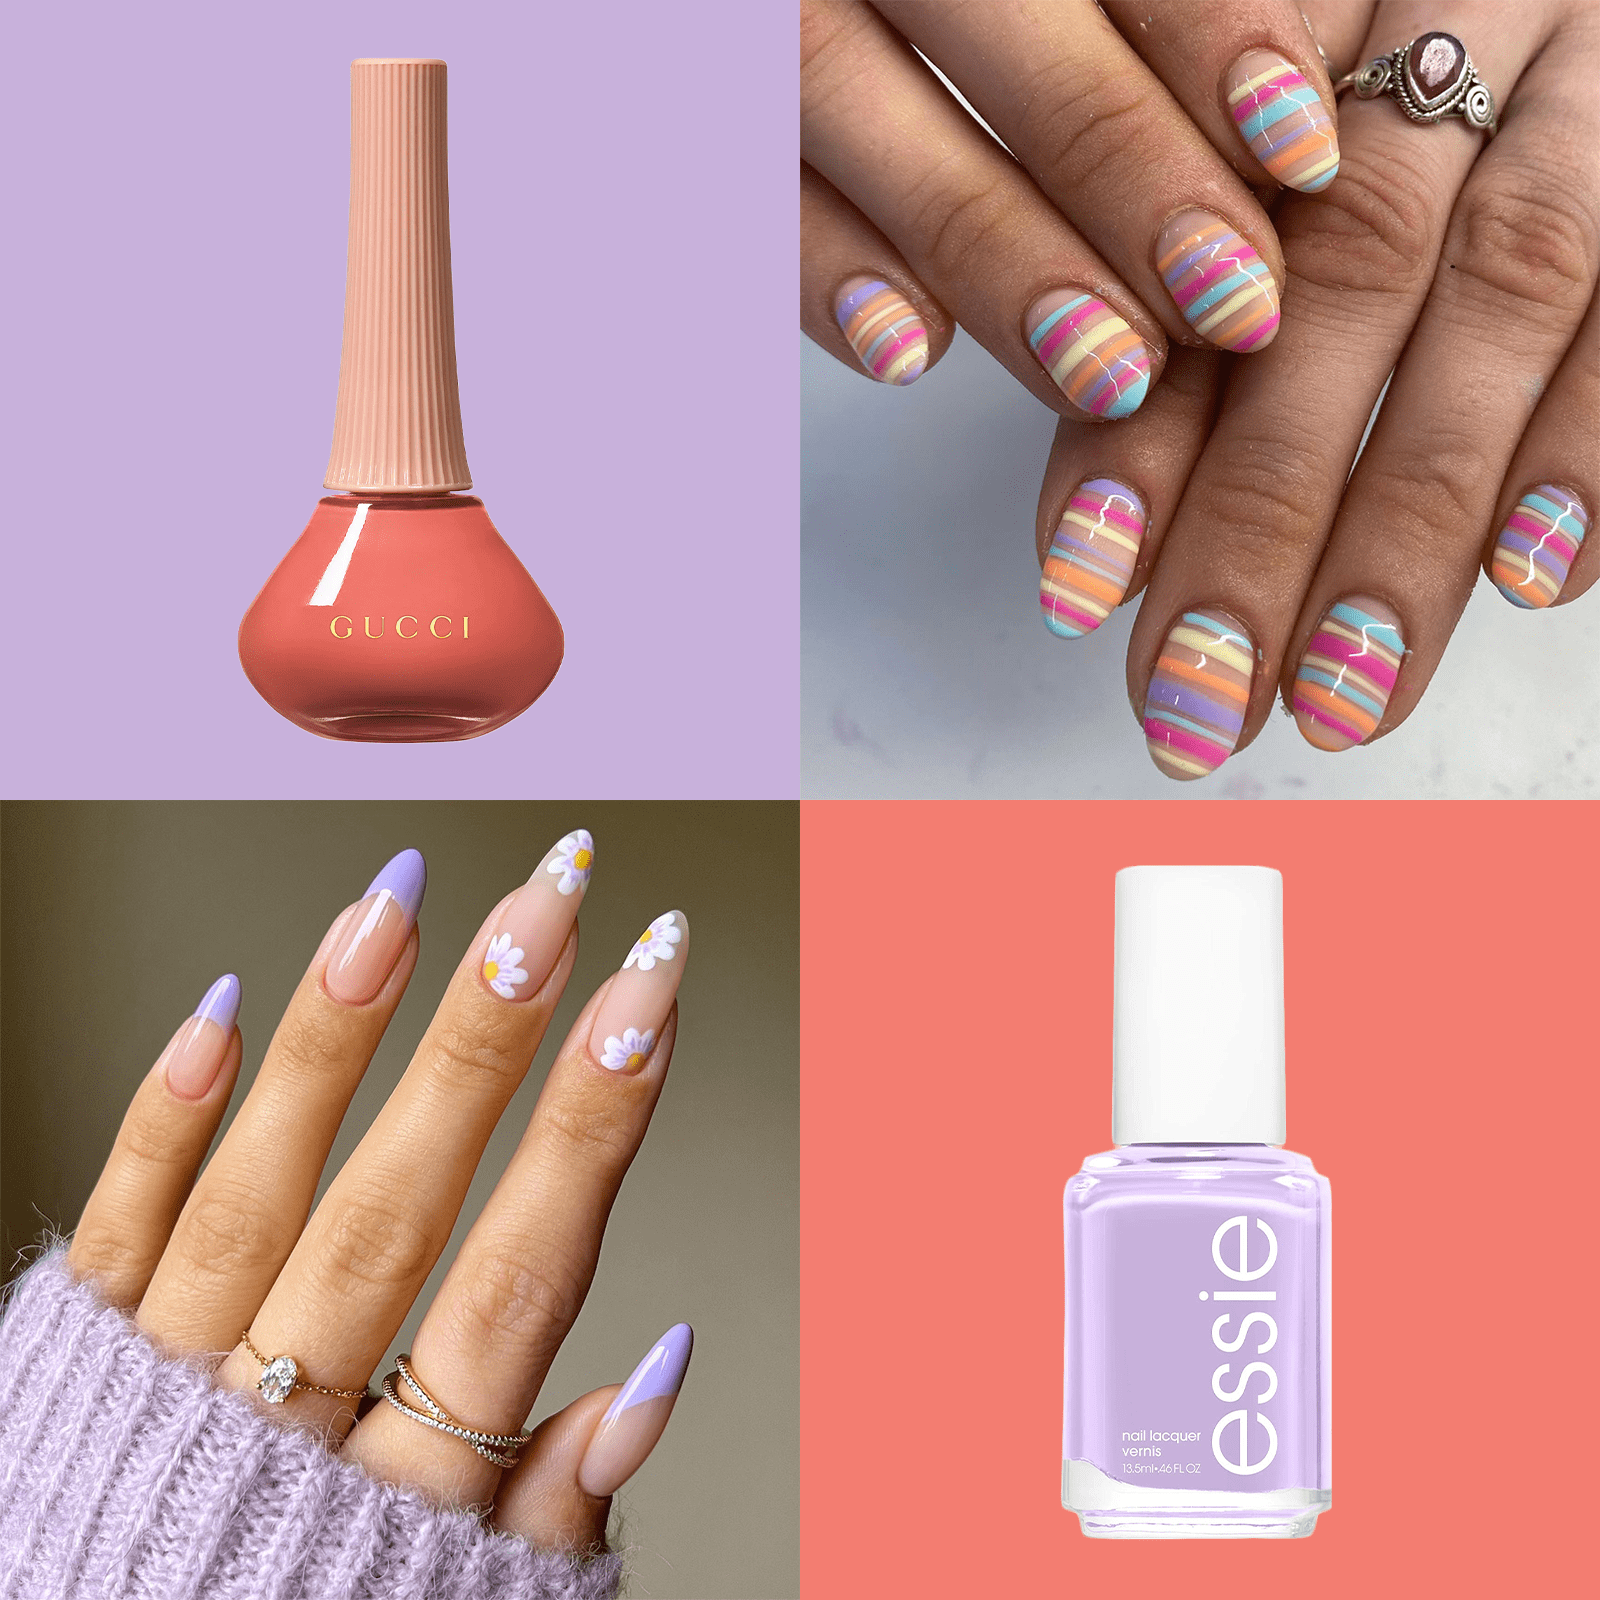 https://www.rd.com/wp-content/uploads/2022/03/25-easter-nail-ideas-that-will-perfect-your-holiday-look-ft-ecomm-via-retailers.com_.png